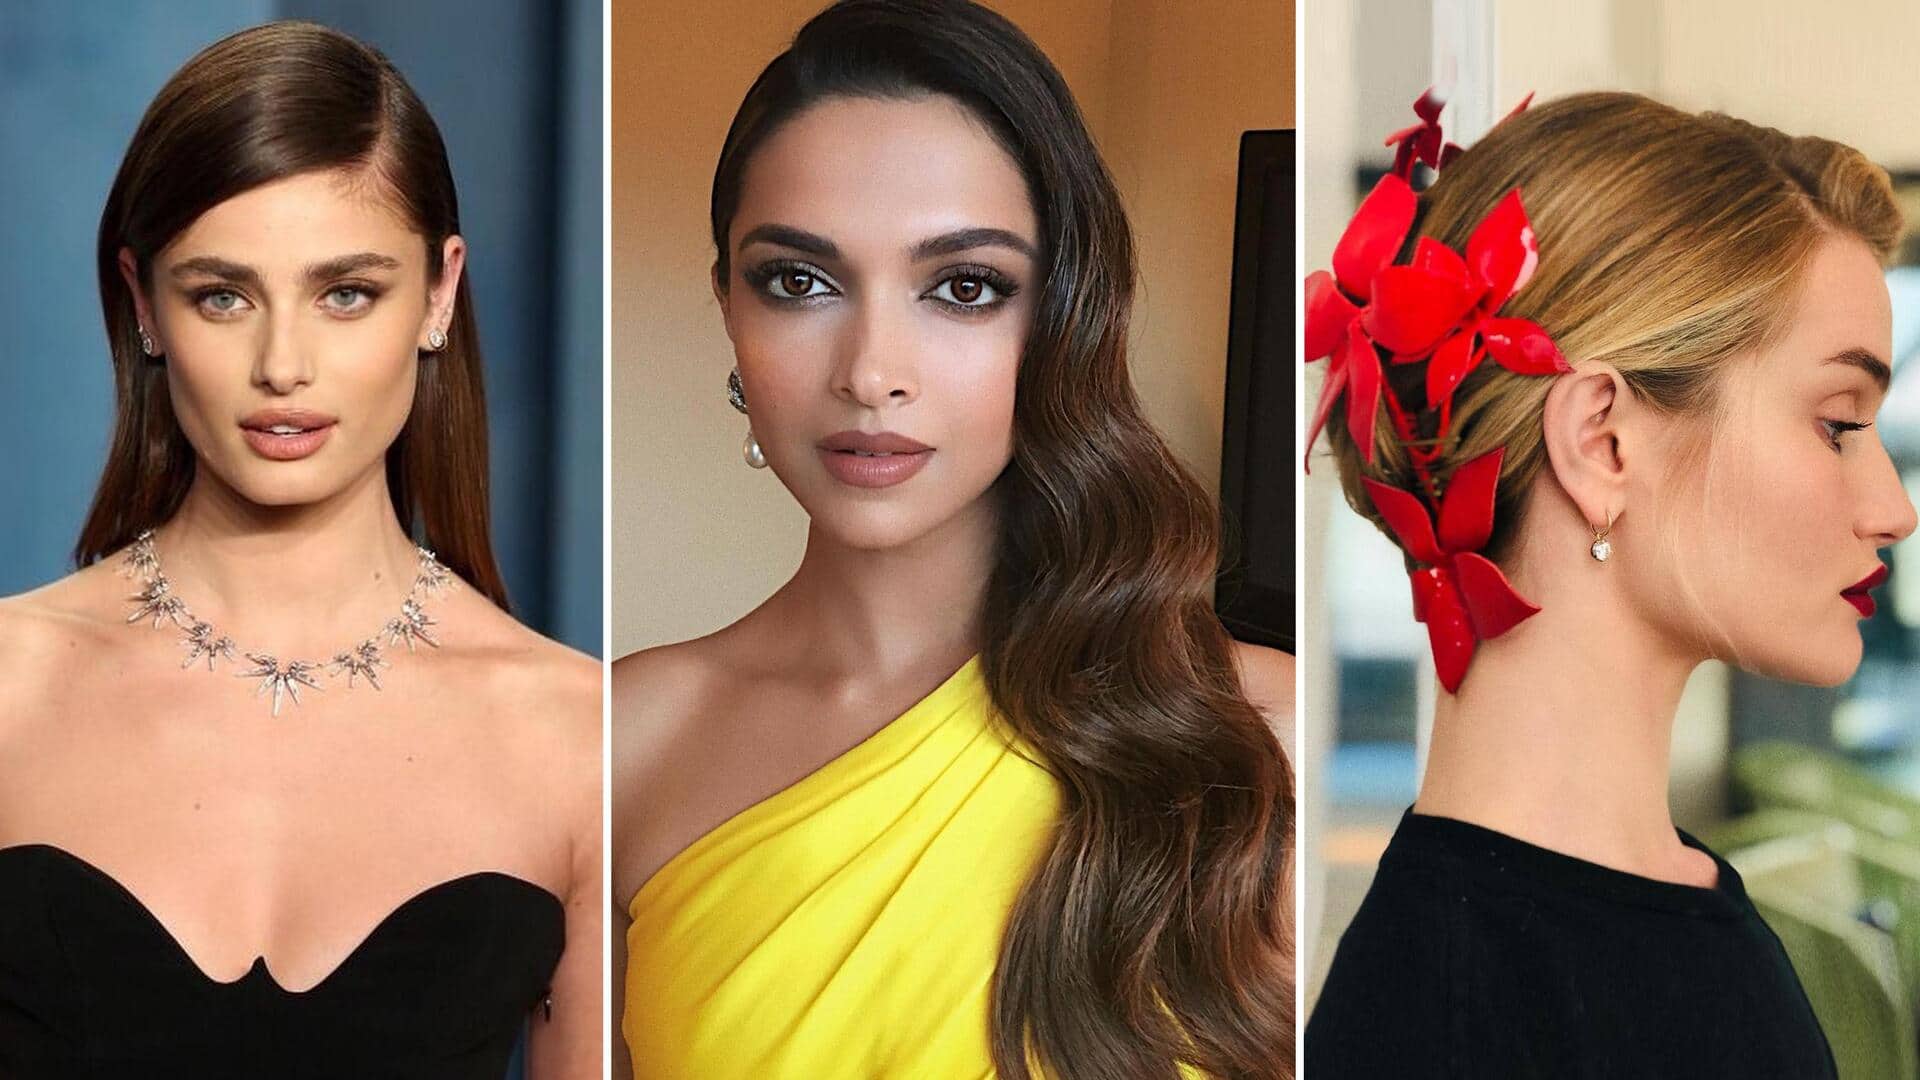 Posh hairstyles you can try at home